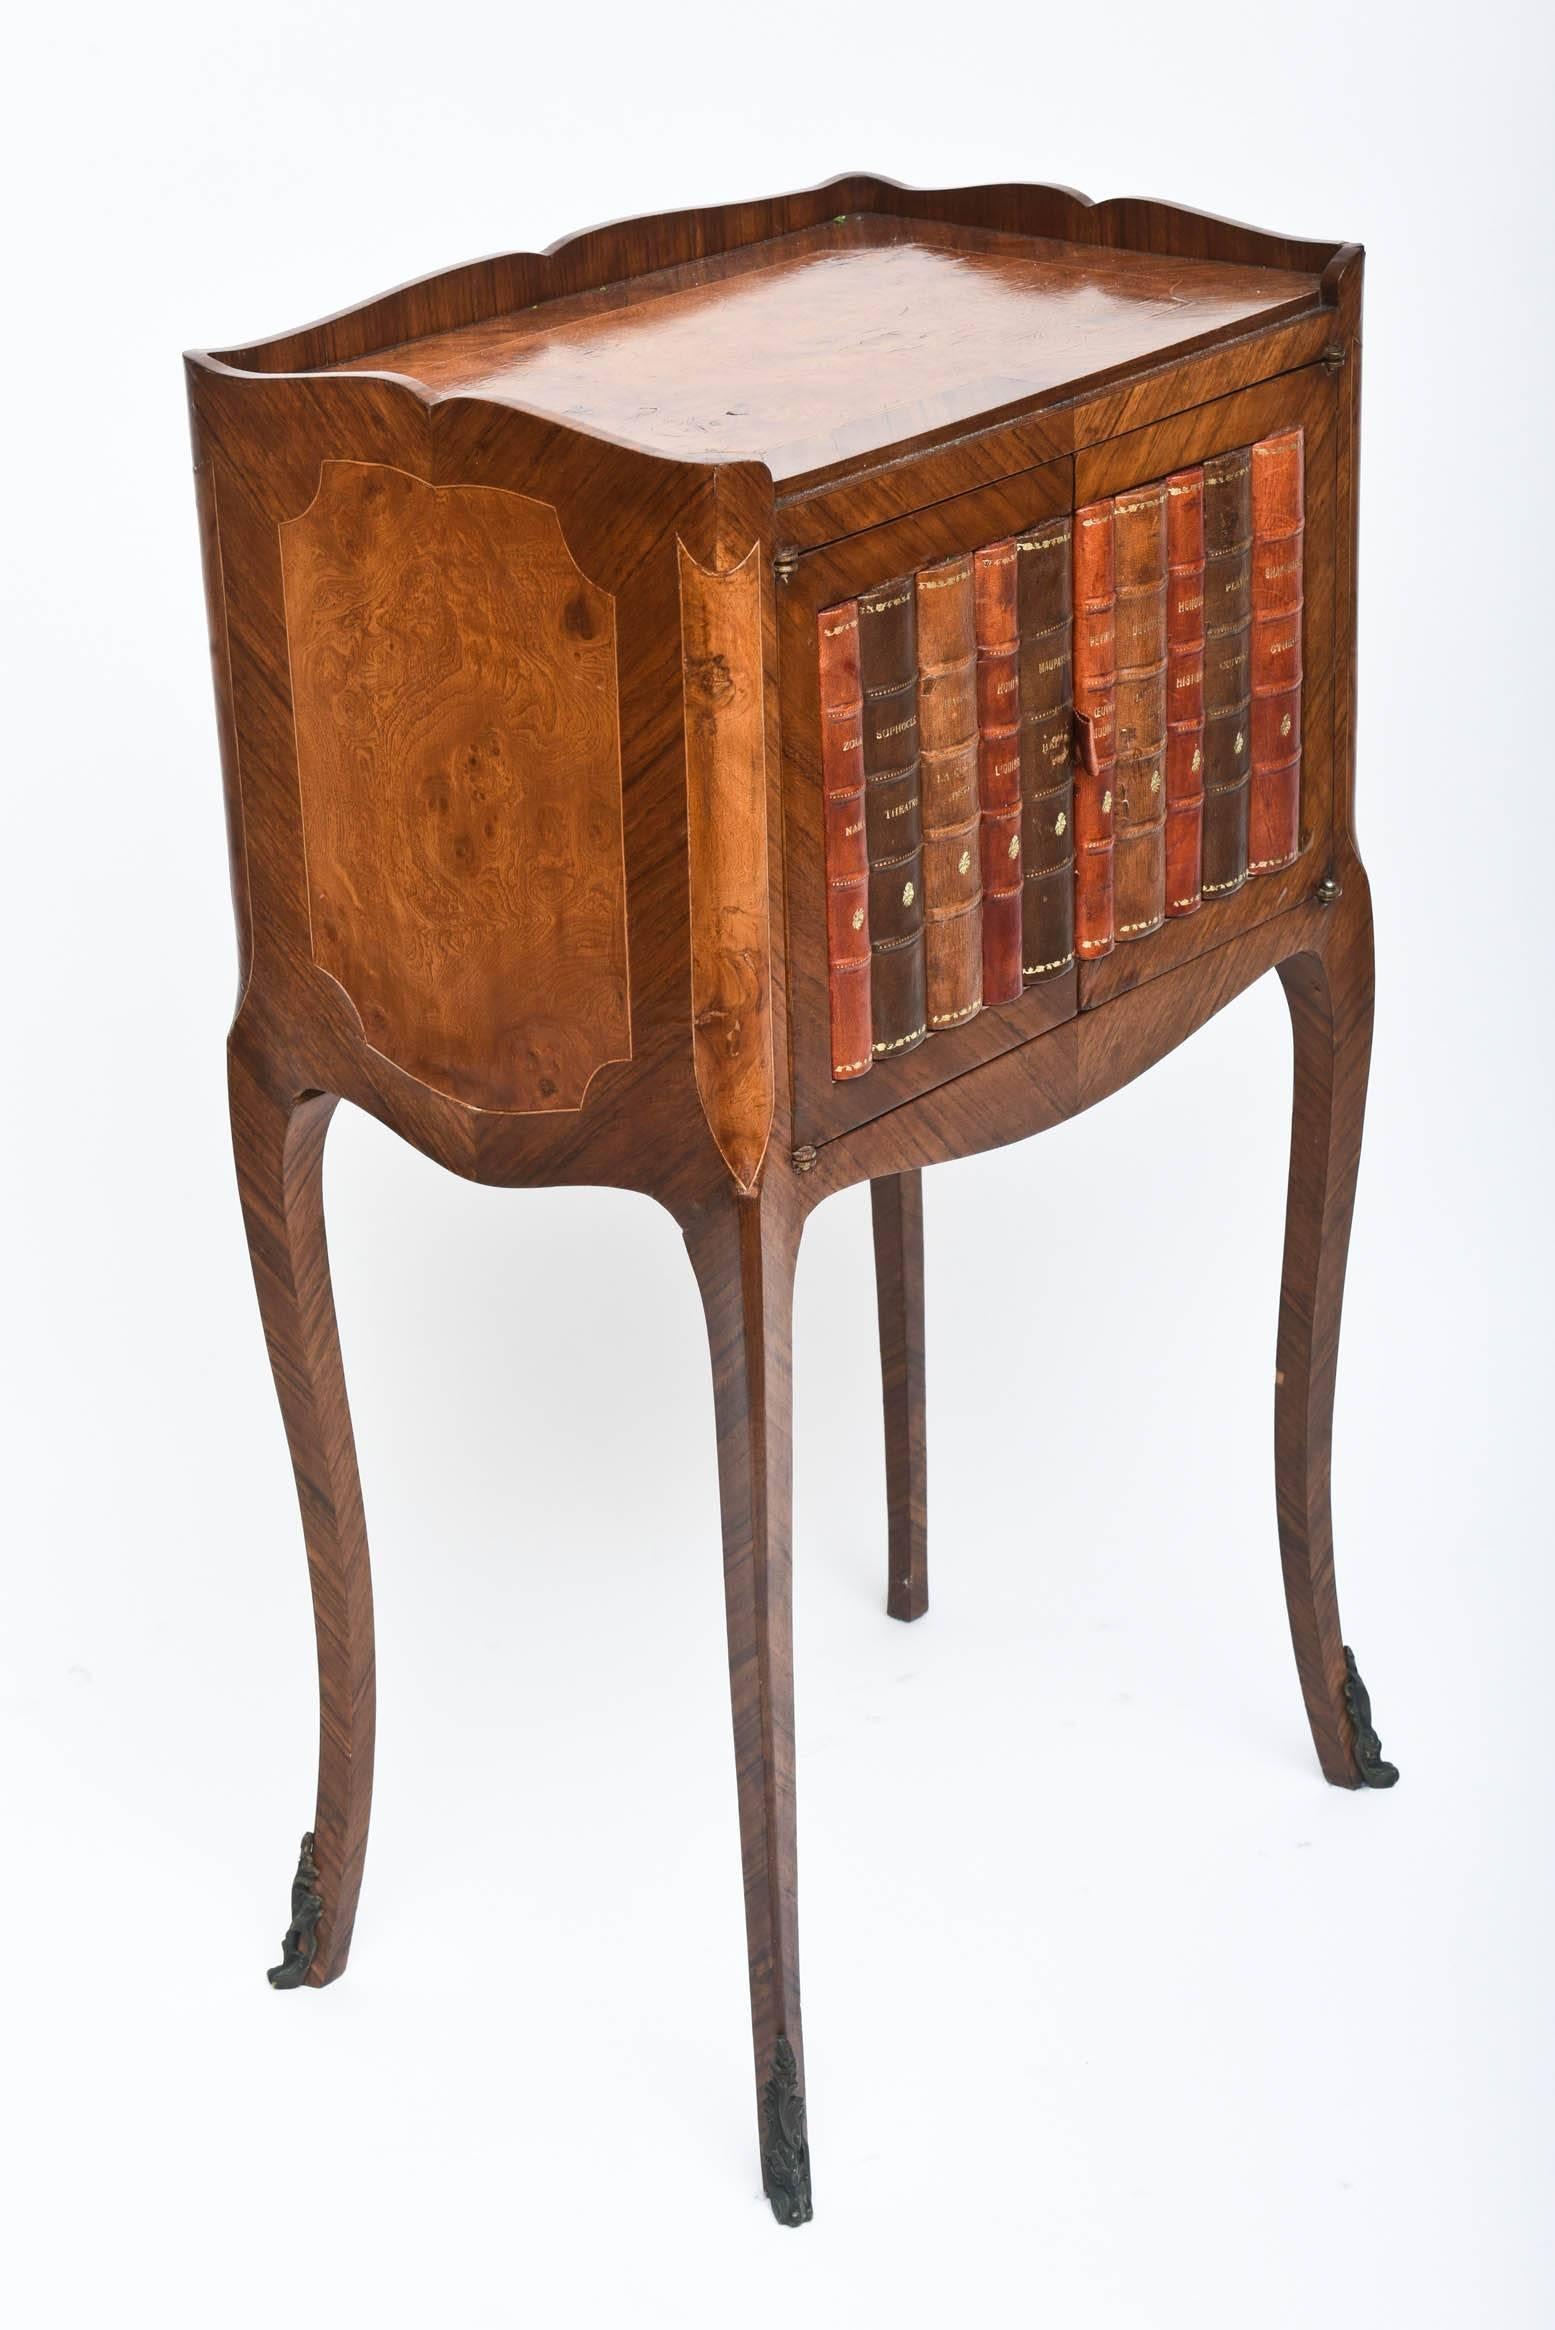 Hand-Crafted Library End or Occasional Table, Faux Books and Great Size